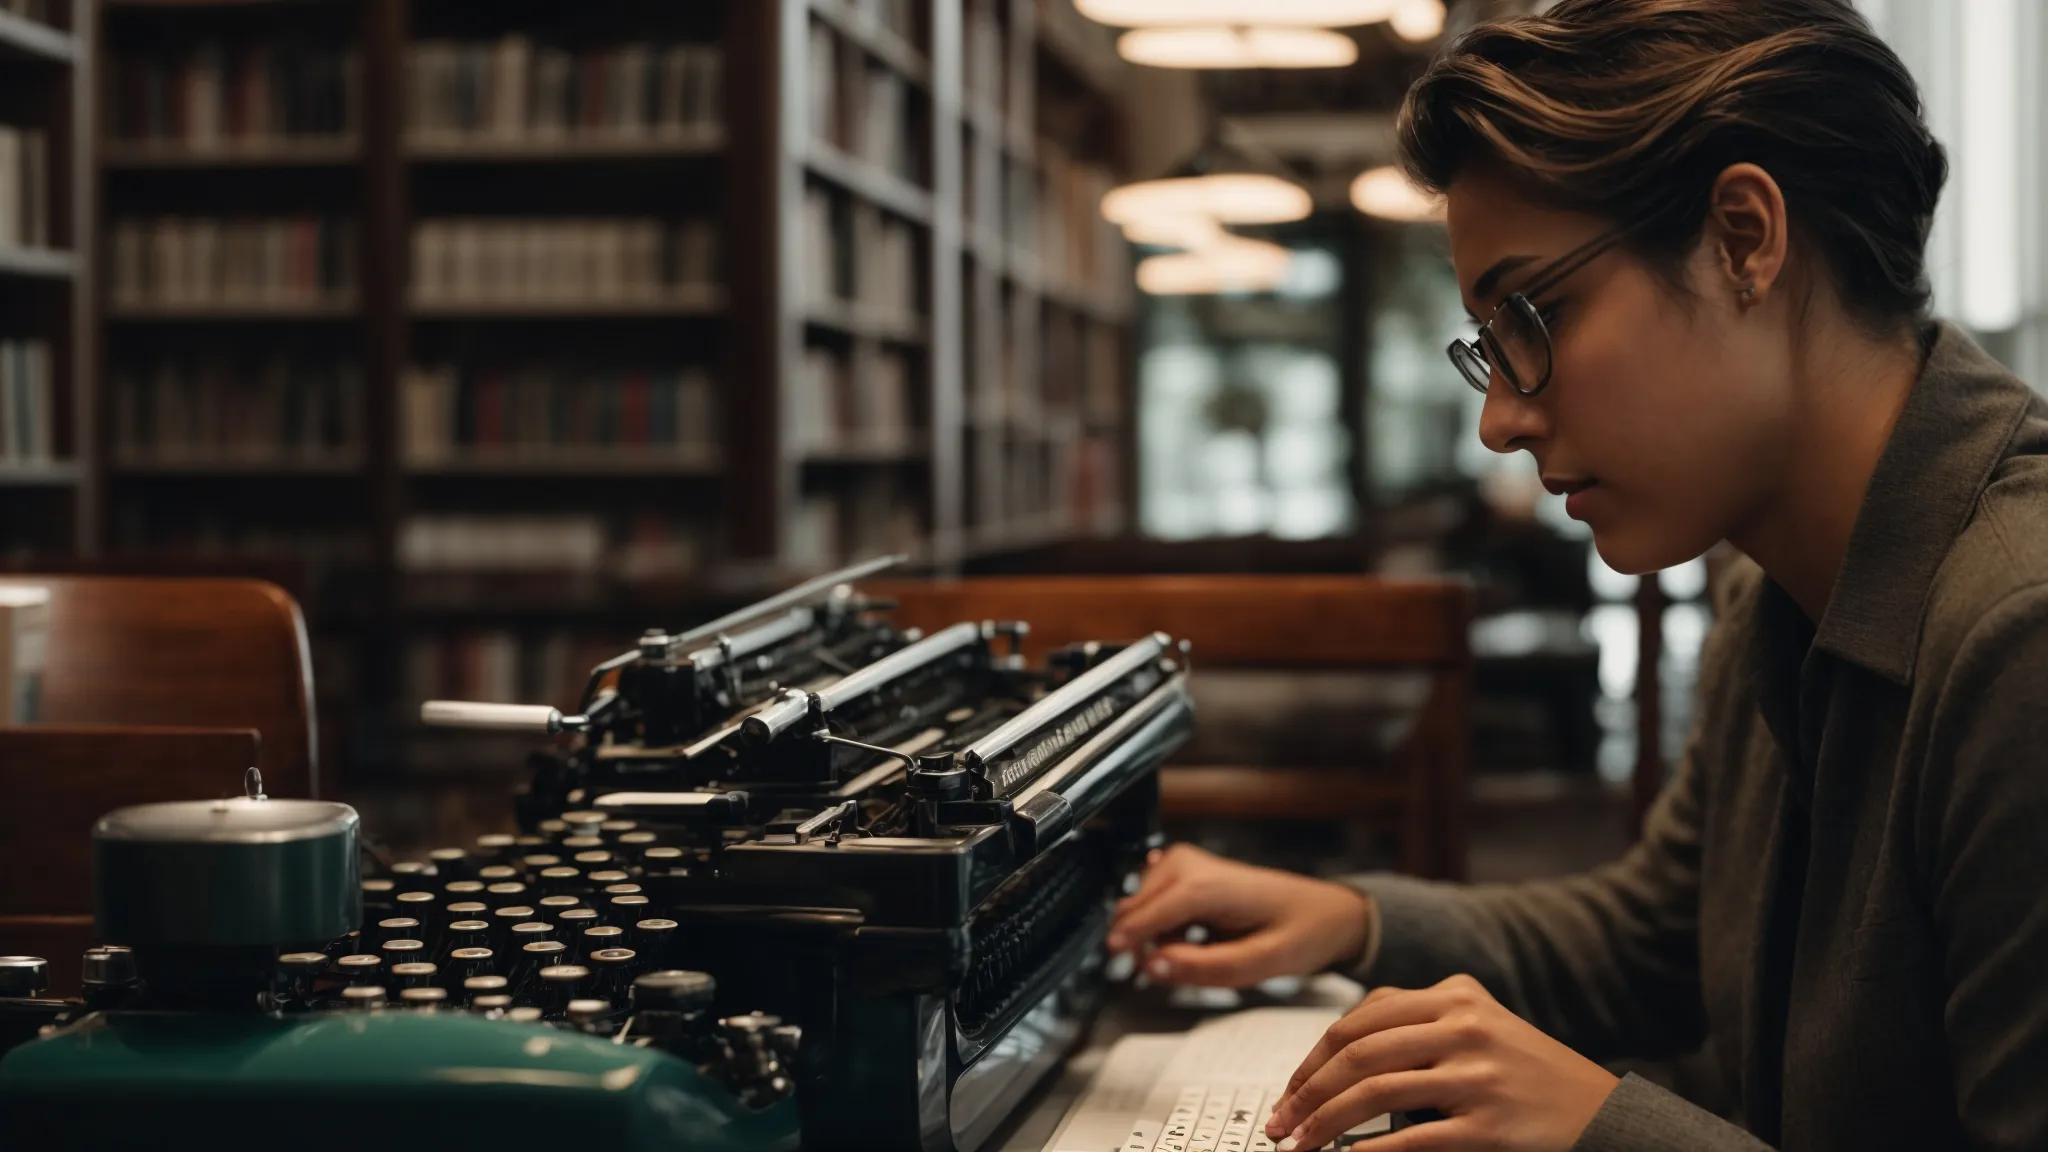 a person thoughtfully types on a vintage typewriter in a tranquil library setting, embodying the careful crafting of language.